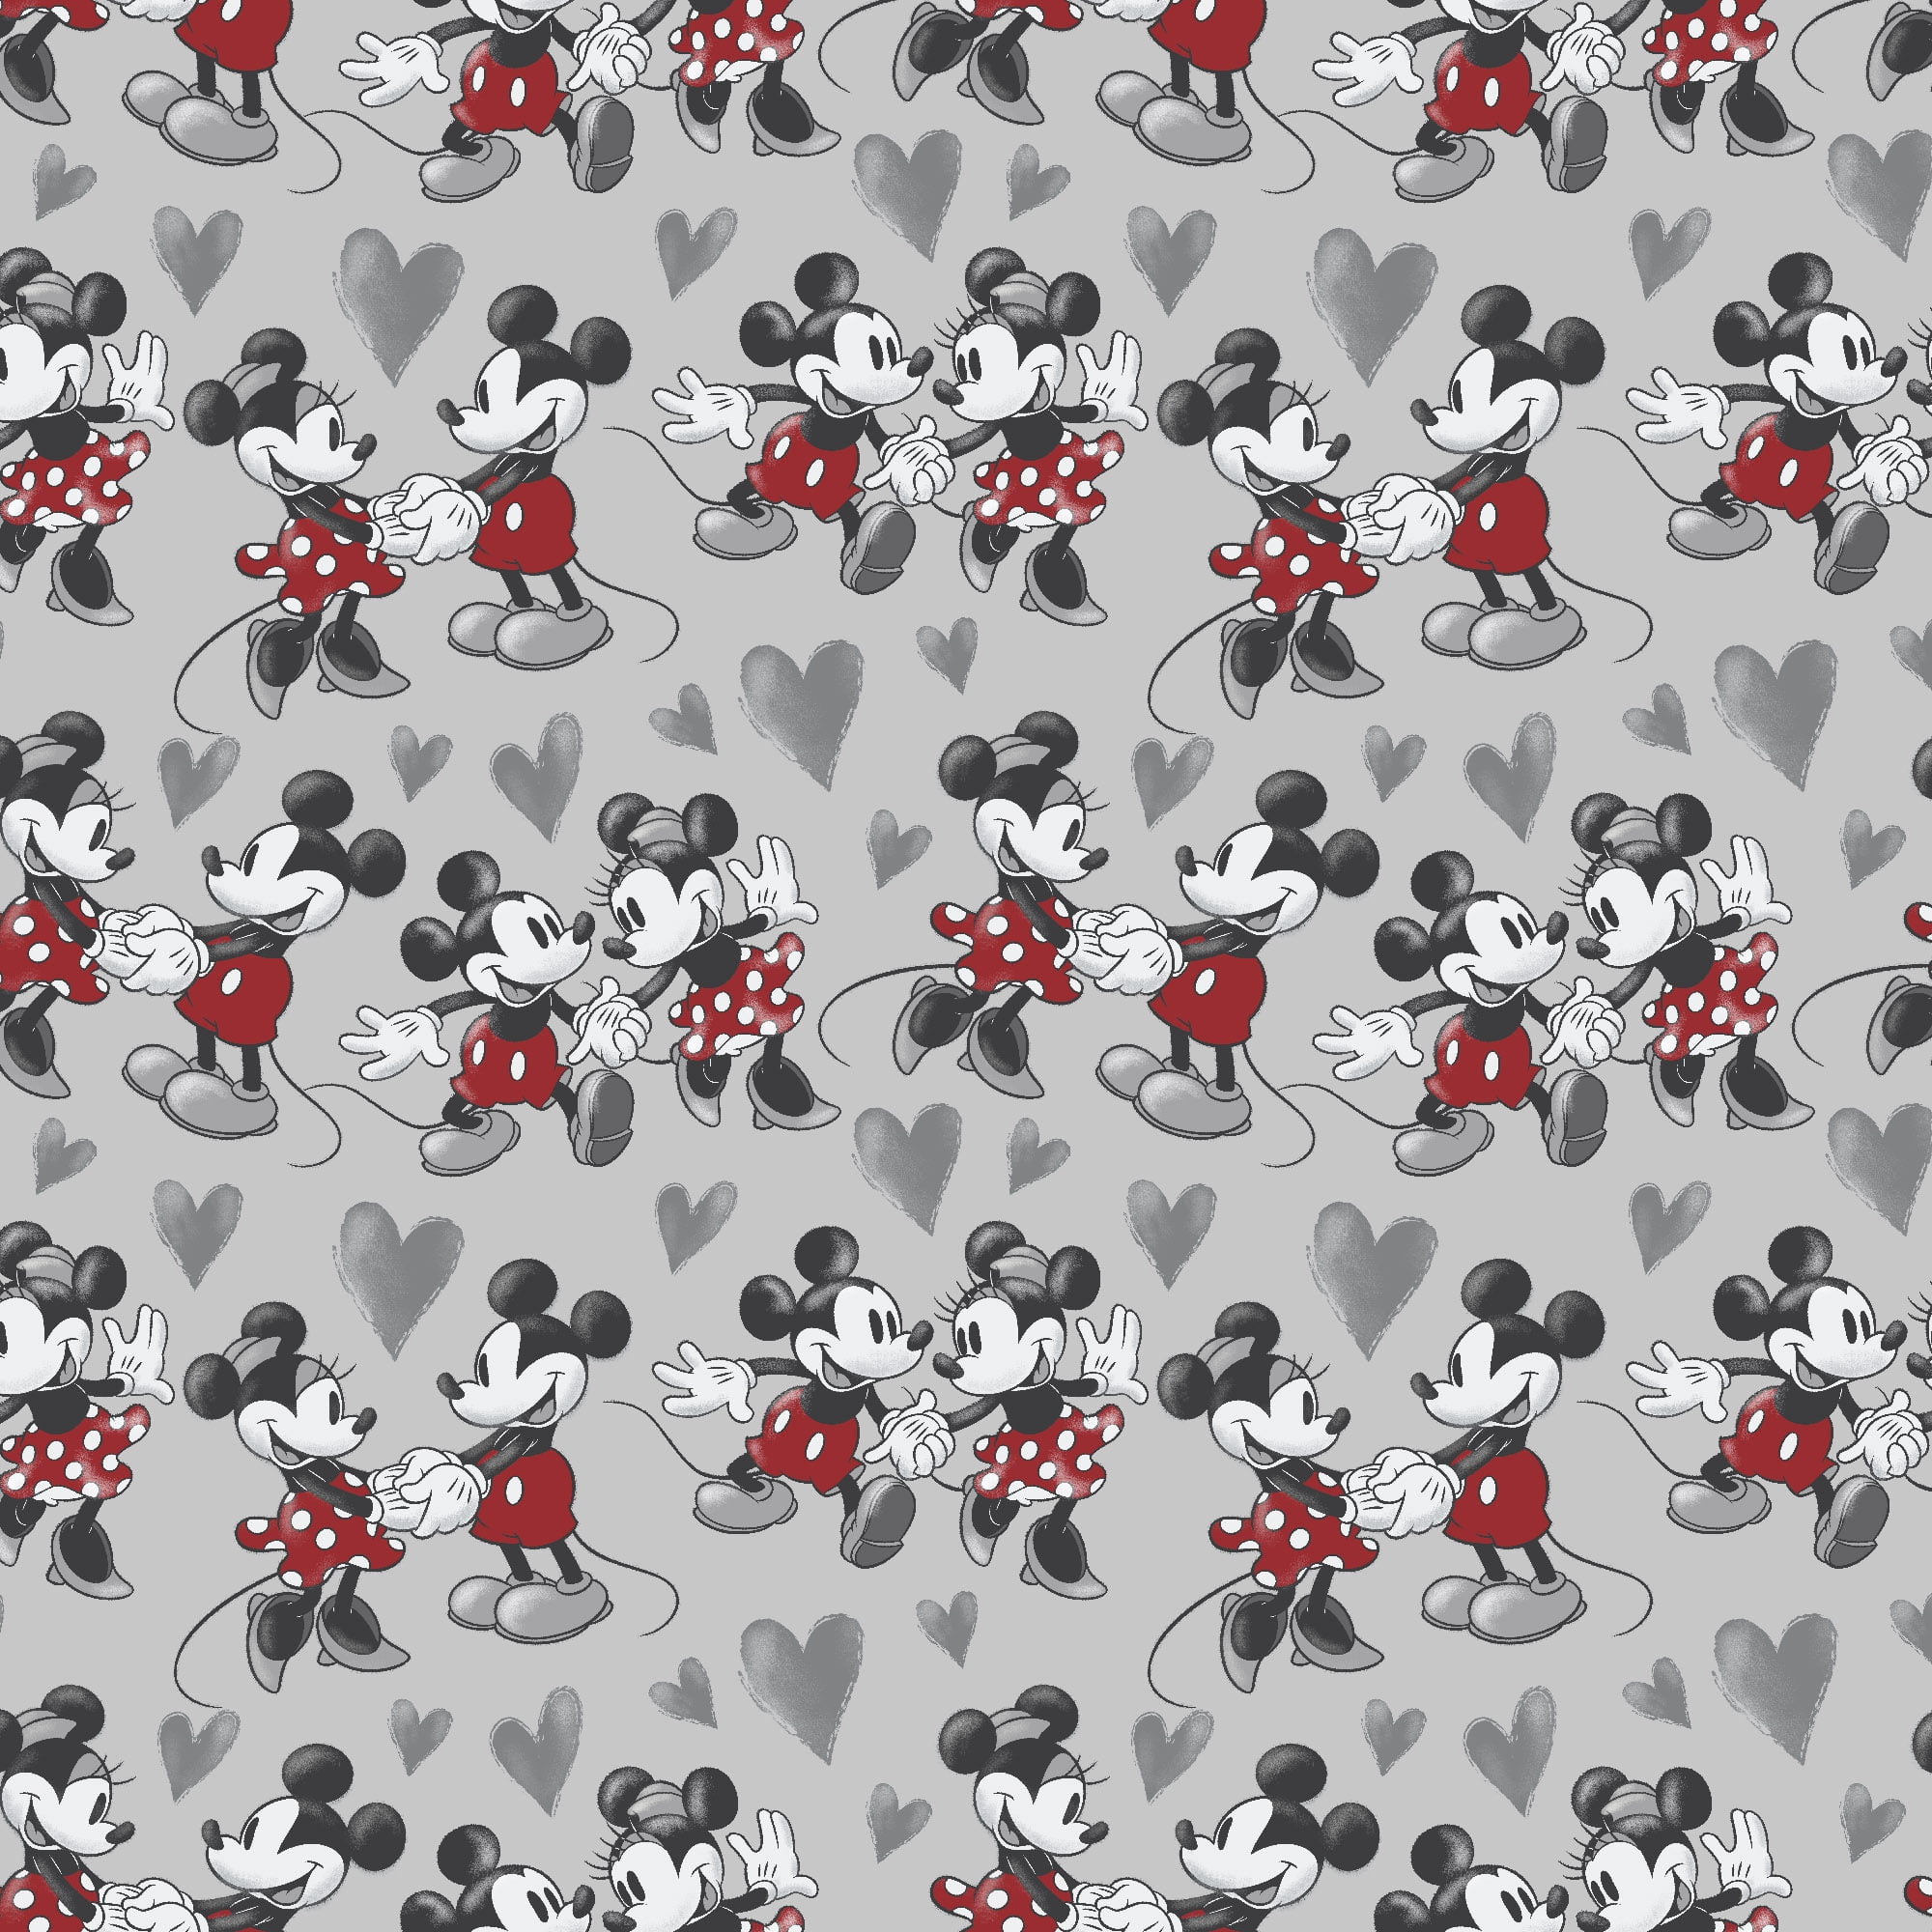 Minnie Mouse fabric Mickey fabric cotton fabric denim Minnie and Mickey  fabric Disney fabric,fabric by the yard,mask making fabric